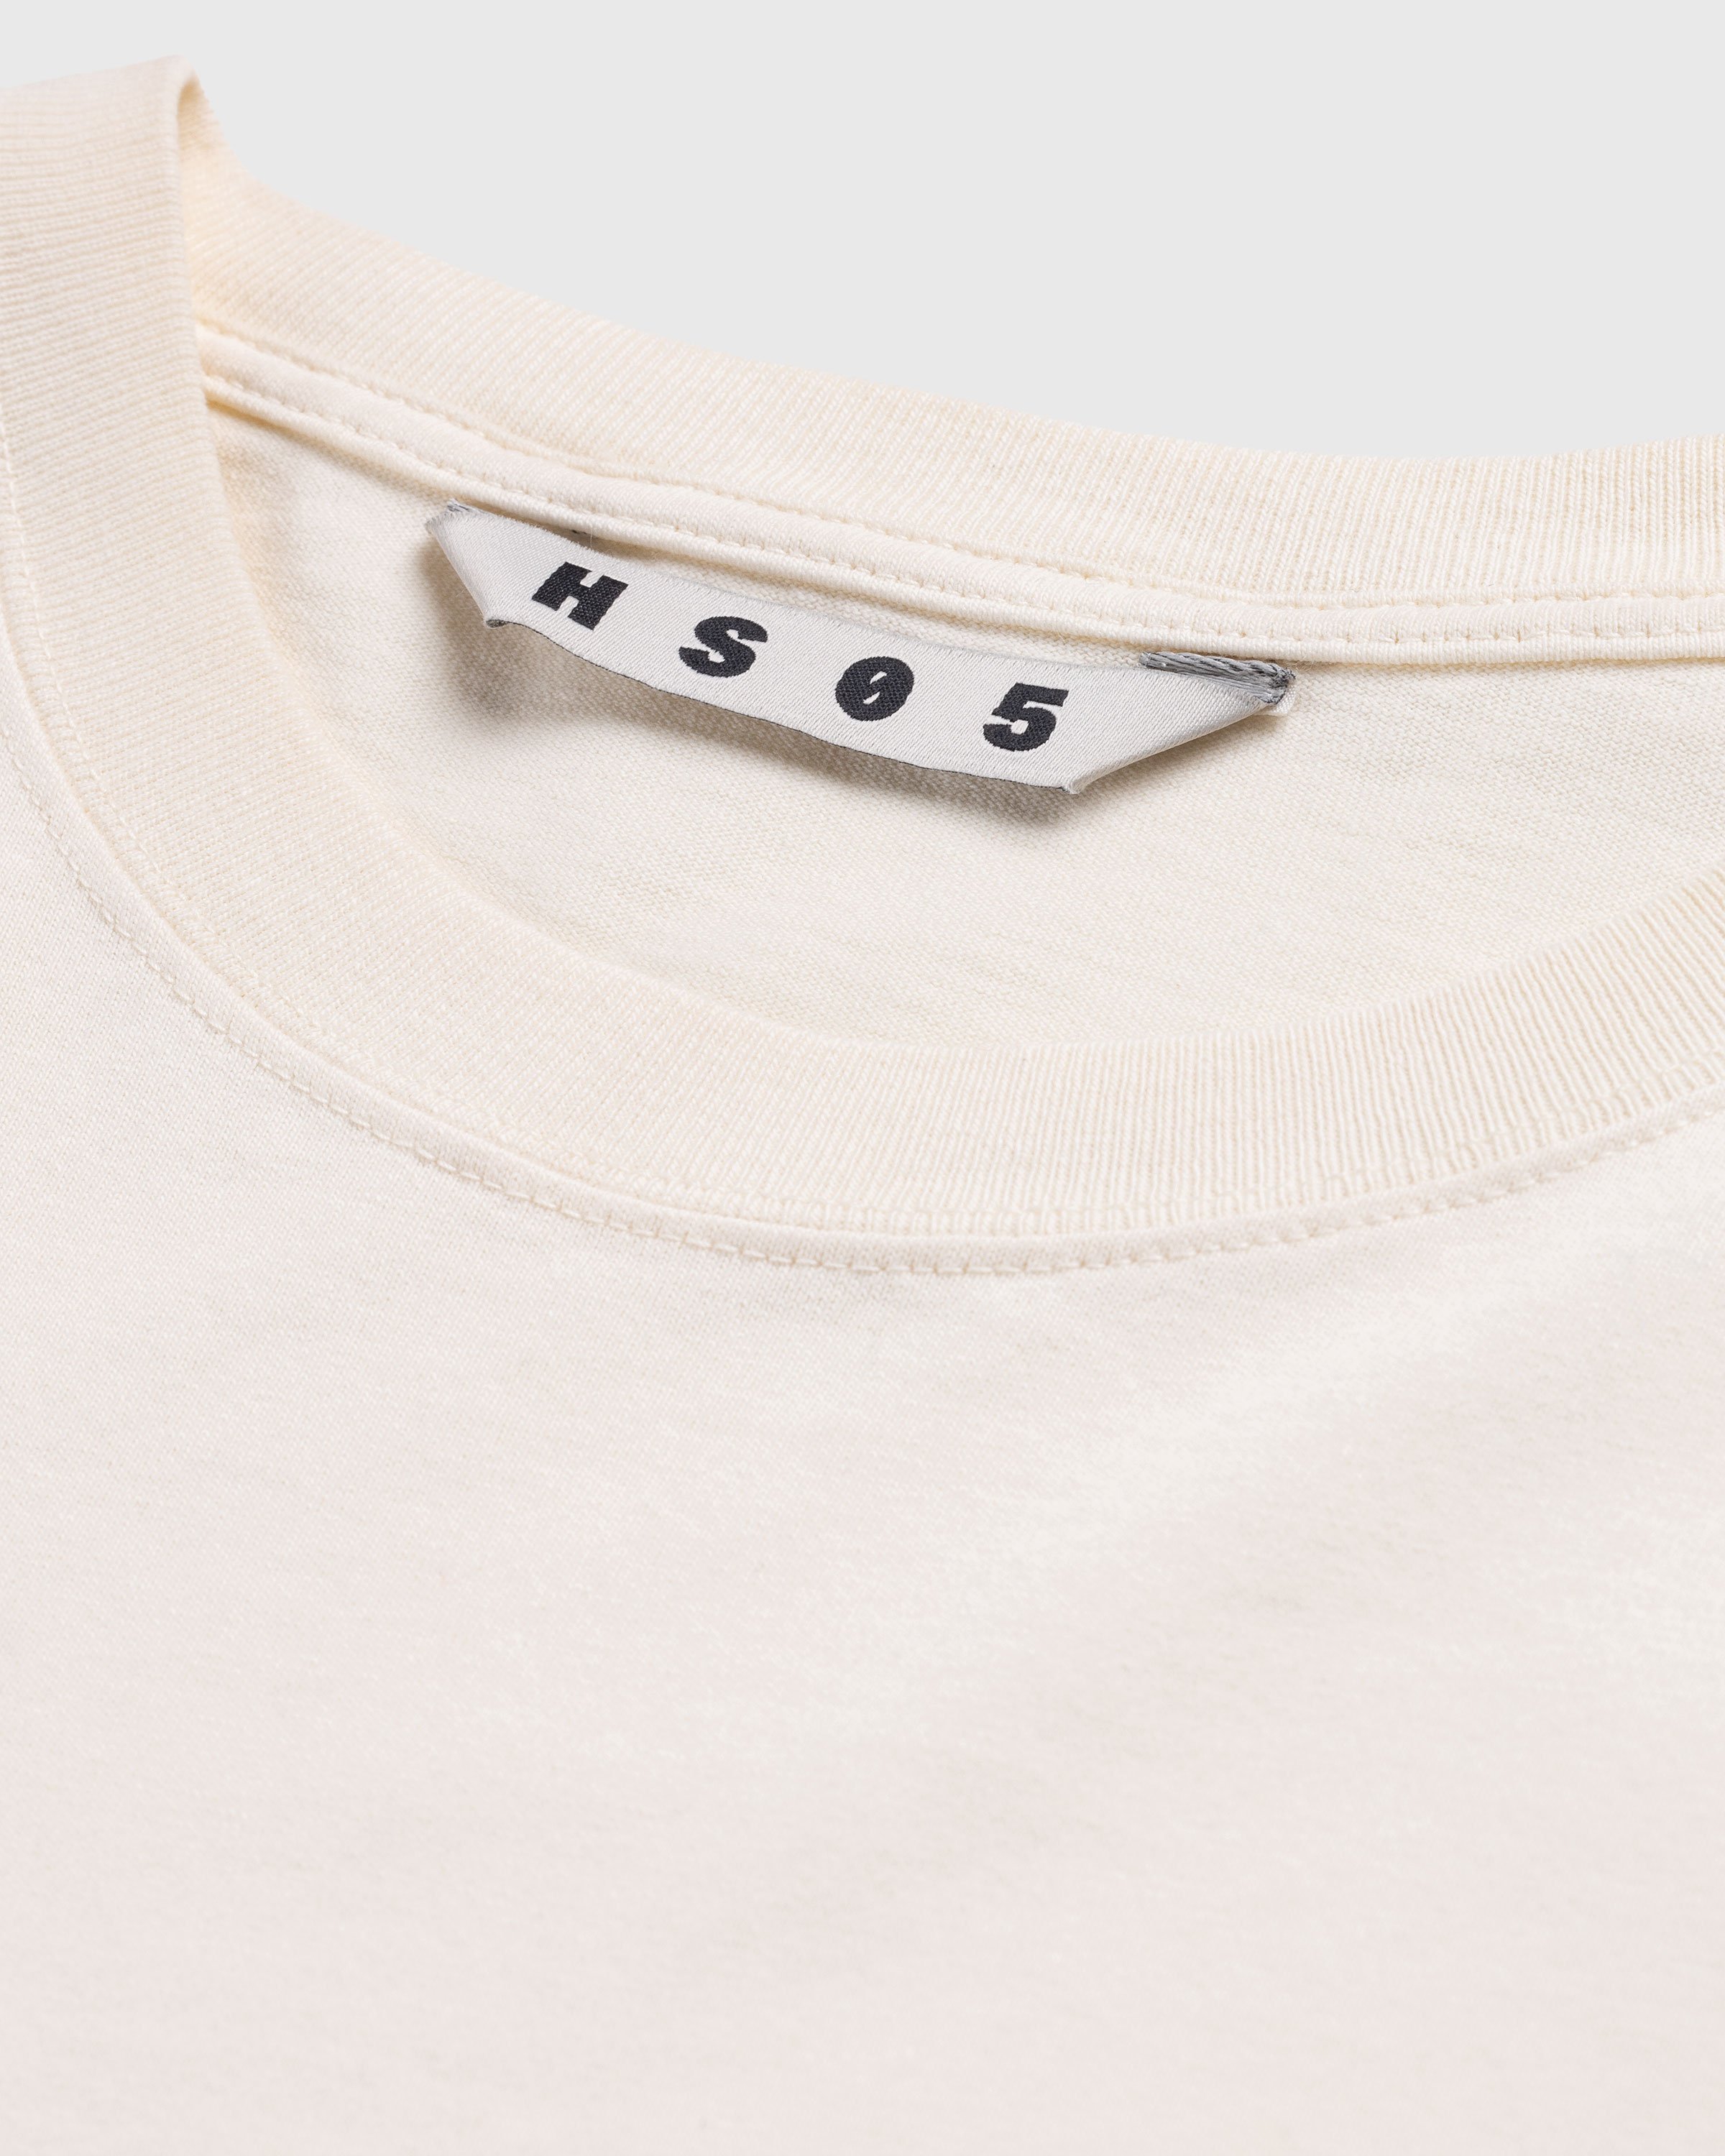 Highsnobiety HS05 - Pigment Dyed Boxy Long Sleeves Jersey Natural - Clothing - Beige - Image 6